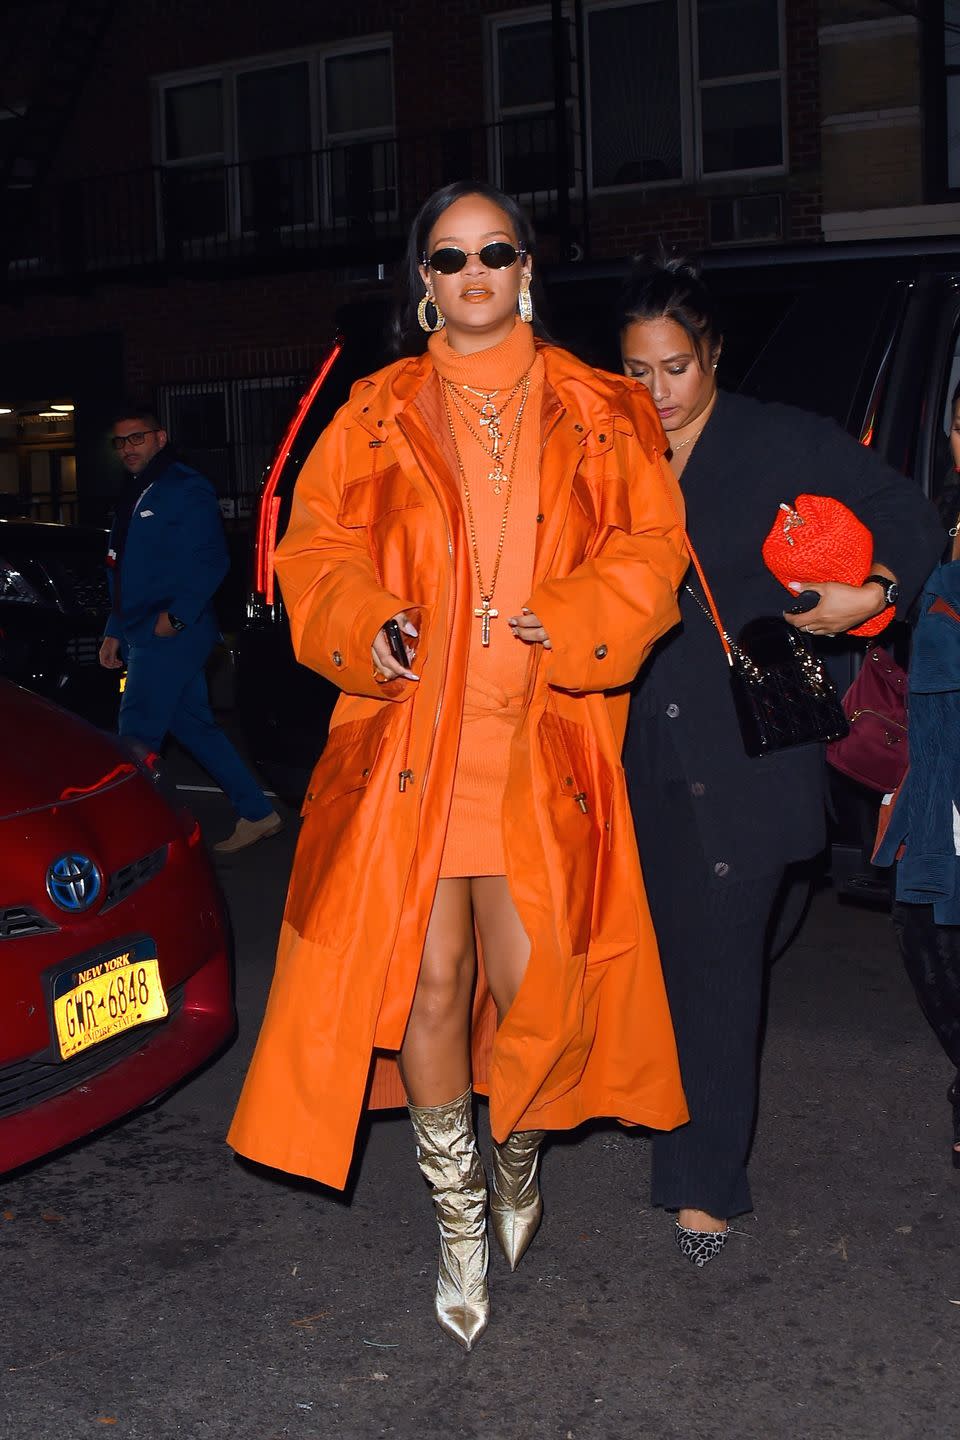 <p>In head-to-toe Fenty, including a trench-inspired <a href="https://www.fenty.com/us/en/products/coats-jackets-trench-inspired-parka-burnt-orange-m/102158.html" rel="nofollow noopener" target="_blank" data-ylk="slk:burnt orange parka;elm:context_link;itc:0;sec:content-canvas" class="link ">burnt orange parka</a>, a <a href="https://www.fenty.com/us/en/products/shirts-dresses-turtleneck-knit-mini-dress-burnt-orange-xs/102198.html" rel="nofollow noopener" target="_blank" data-ylk="slk:turtleneck knit mini dress;elm:context_link;itc:0;sec:content-canvas" class="link ">turtleneck knit mini dress</a>, <a href="https://www.fenty.com/us/en/products/shoes-parachute-boots-105-champagne-35/102091.html" rel="nofollow noopener" target="_blank" data-ylk="slk:parachute boots;elm:context_link;itc:0;sec:content-canvas" class="link ">parachute boots</a>, and <a href="https://www.fenty.com/us/en/products/sunglasses-side-note-sunglasses-camo-green-one-size/102118.html" rel="nofollow noopener" target="_blank" data-ylk="slk:side note shades;elm:context_link;itc:0;sec:content-canvas" class="link ">side note shades</a> at the Fenty pop-up shop in Bergdorfs. The singer accessorized her look with jewelry by <a href="https://www.modaoperandi.com/apres-ski-diamonds-ss20" rel="nofollow noopener" target="_blank" data-ylk="slk:Melissa Kaye;elm:context_link;itc:0;sec:content-canvas" class="link ">Melissa Kaye</a>, <a href="https://www.davidwebb.com/pages/djwe" rel="nofollow noopener" target="_blank" data-ylk="slk:David Webb;elm:context_link;itc:0;sec:content-canvas" class="link ">David Webb</a>, <a href="https://www.chromehearts.com/" rel="nofollow noopener" target="_blank" data-ylk="slk:Chrome Hearts;elm:context_link;itc:0;sec:content-canvas" class="link ">Chrome Hearts</a>, <a href="http://www.suegragg.com/" rel="nofollow noopener" target="_blank" data-ylk="slk:Sue Gragg;elm:context_link;itc:0;sec:content-canvas" class="link ">Sue Gragg</a>, and <a href="https://www.rafaelloandcompany.com/" rel="nofollow noopener" target="_blank" data-ylk="slk:Rafaello and Co;elm:context_link;itc:0;sec:content-canvas" class="link ">Rafaello and Co</a>.</p>